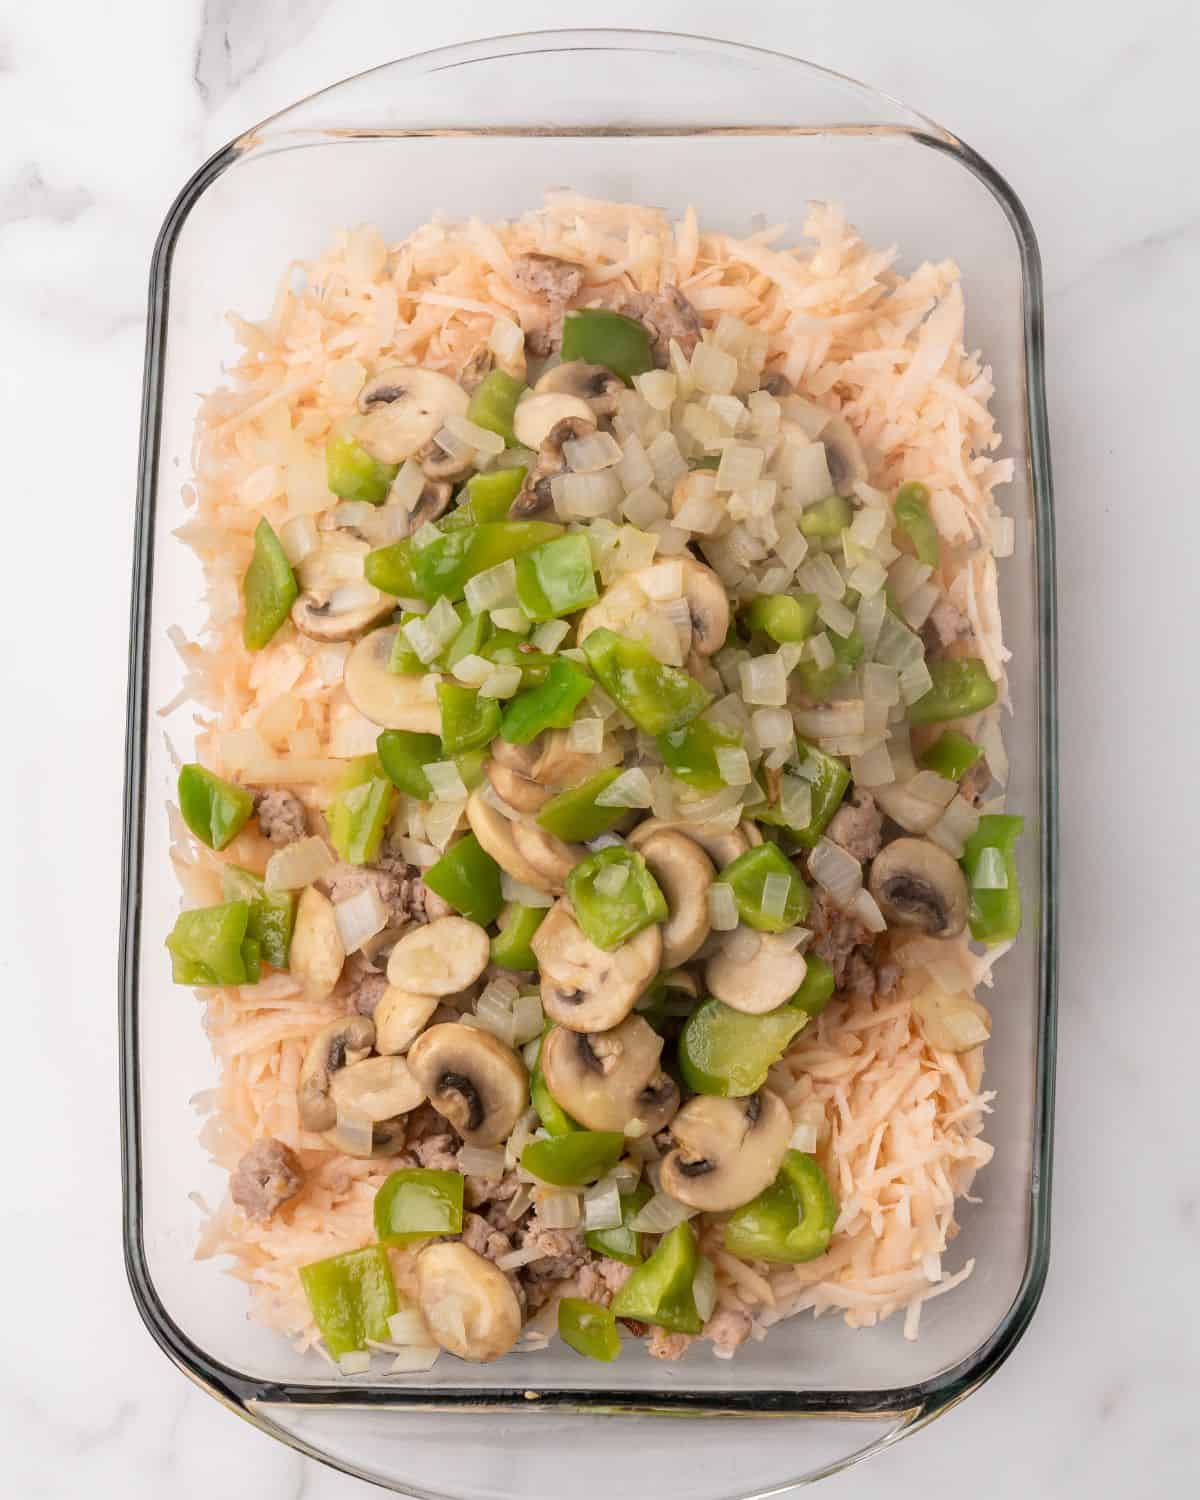 hash browns and veggies in the casserole dish